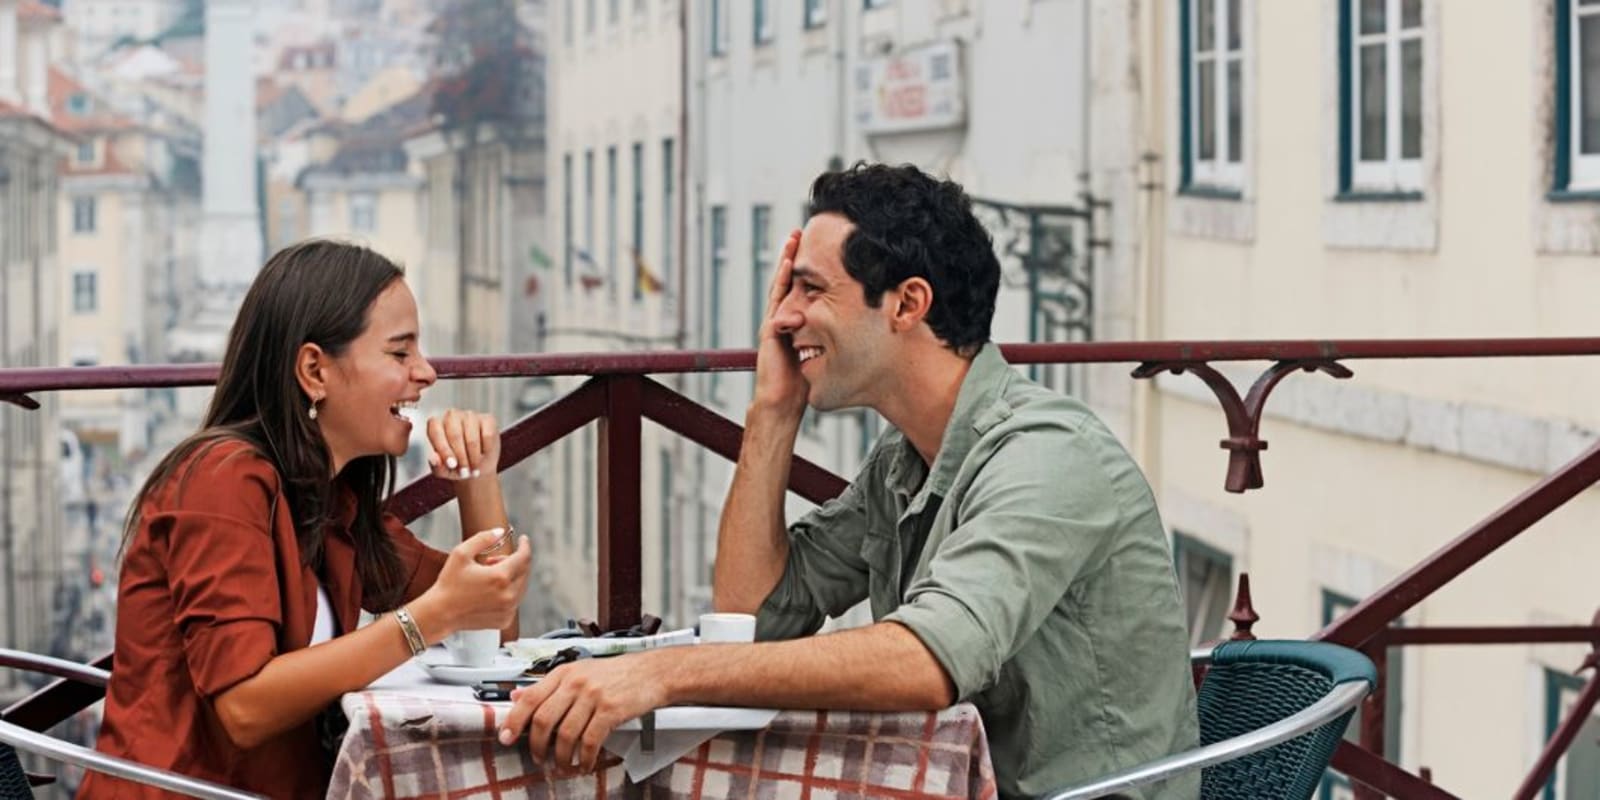 A couple on a balcony having a romantic dinner and laughing together